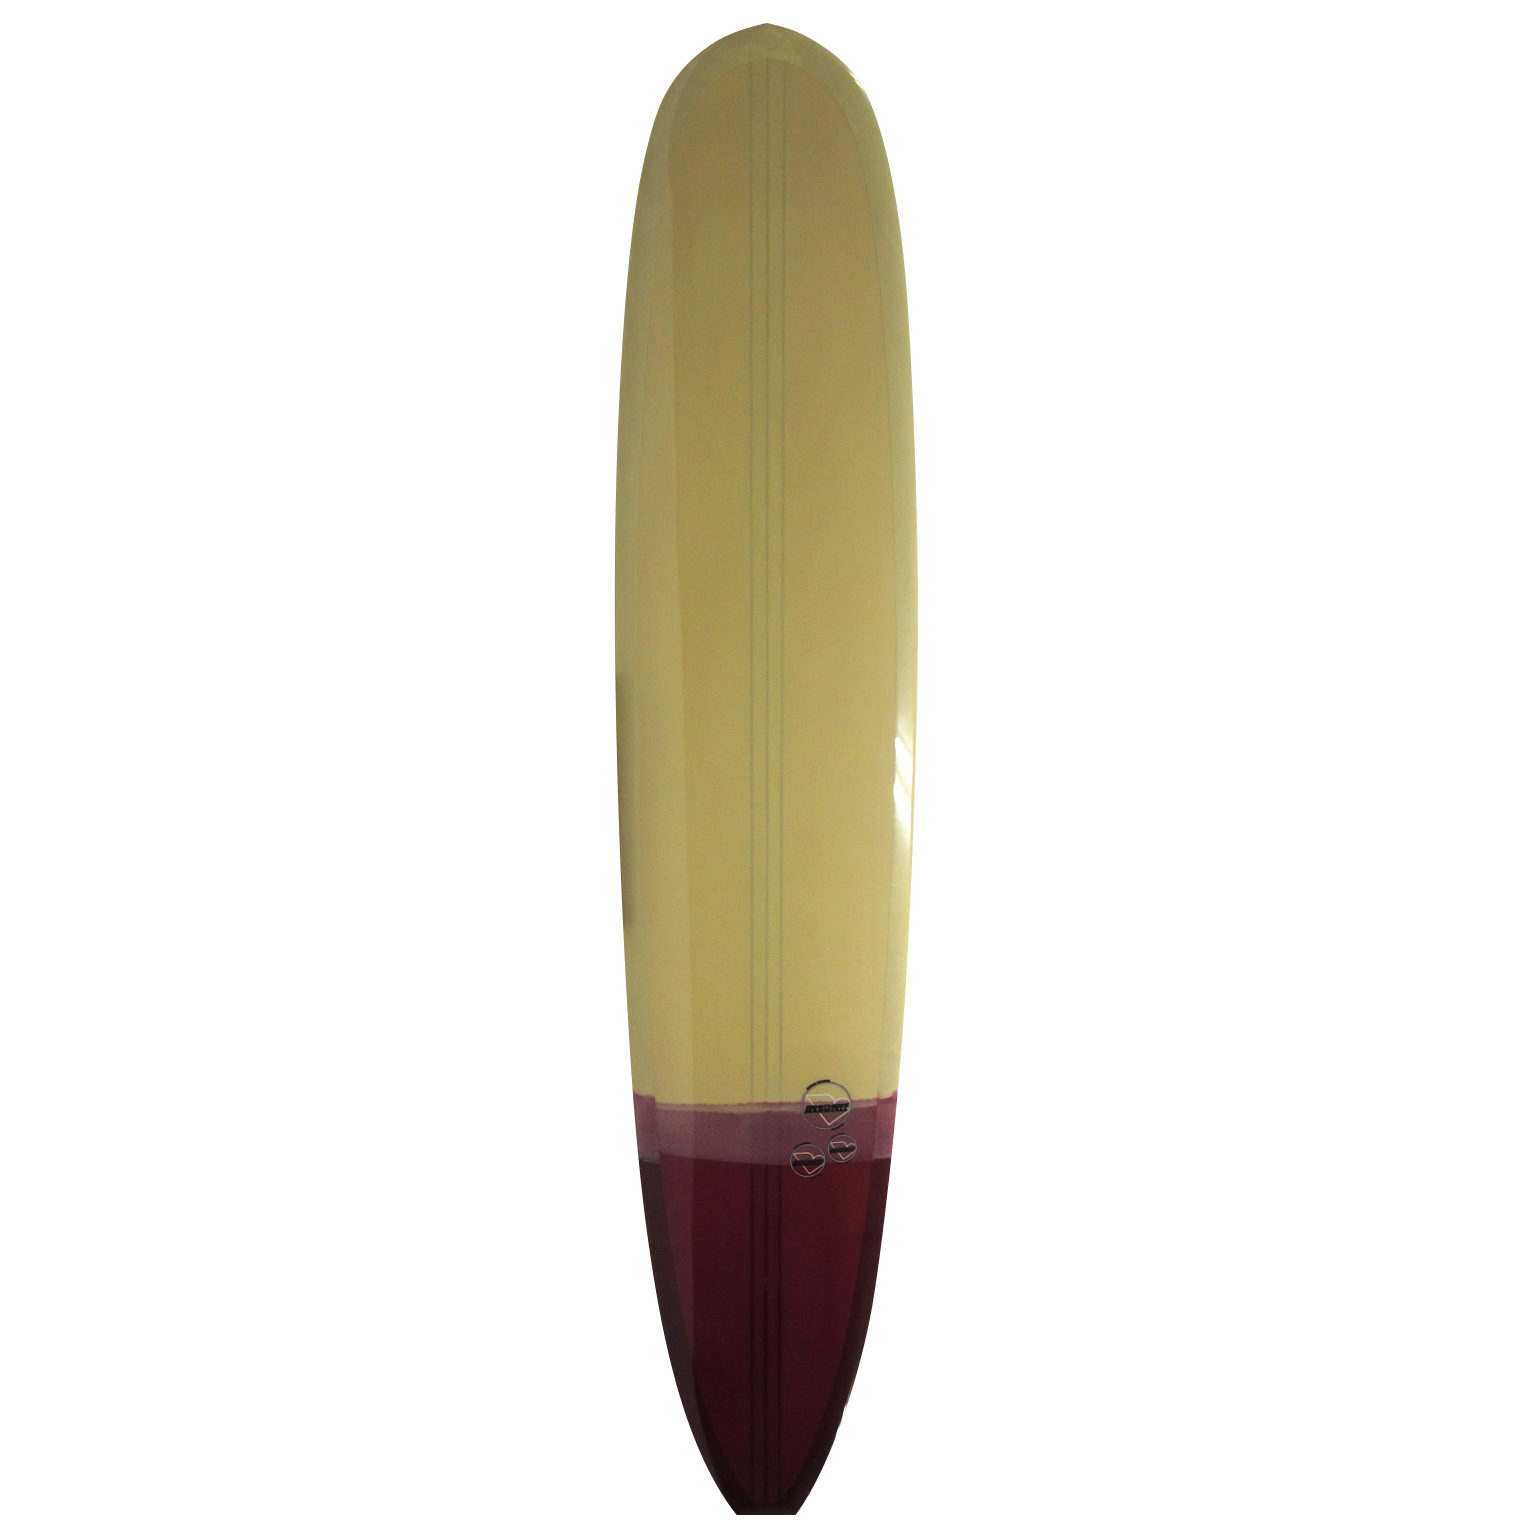  / Anderson Surfboards / 9`8 Marshall Brothers